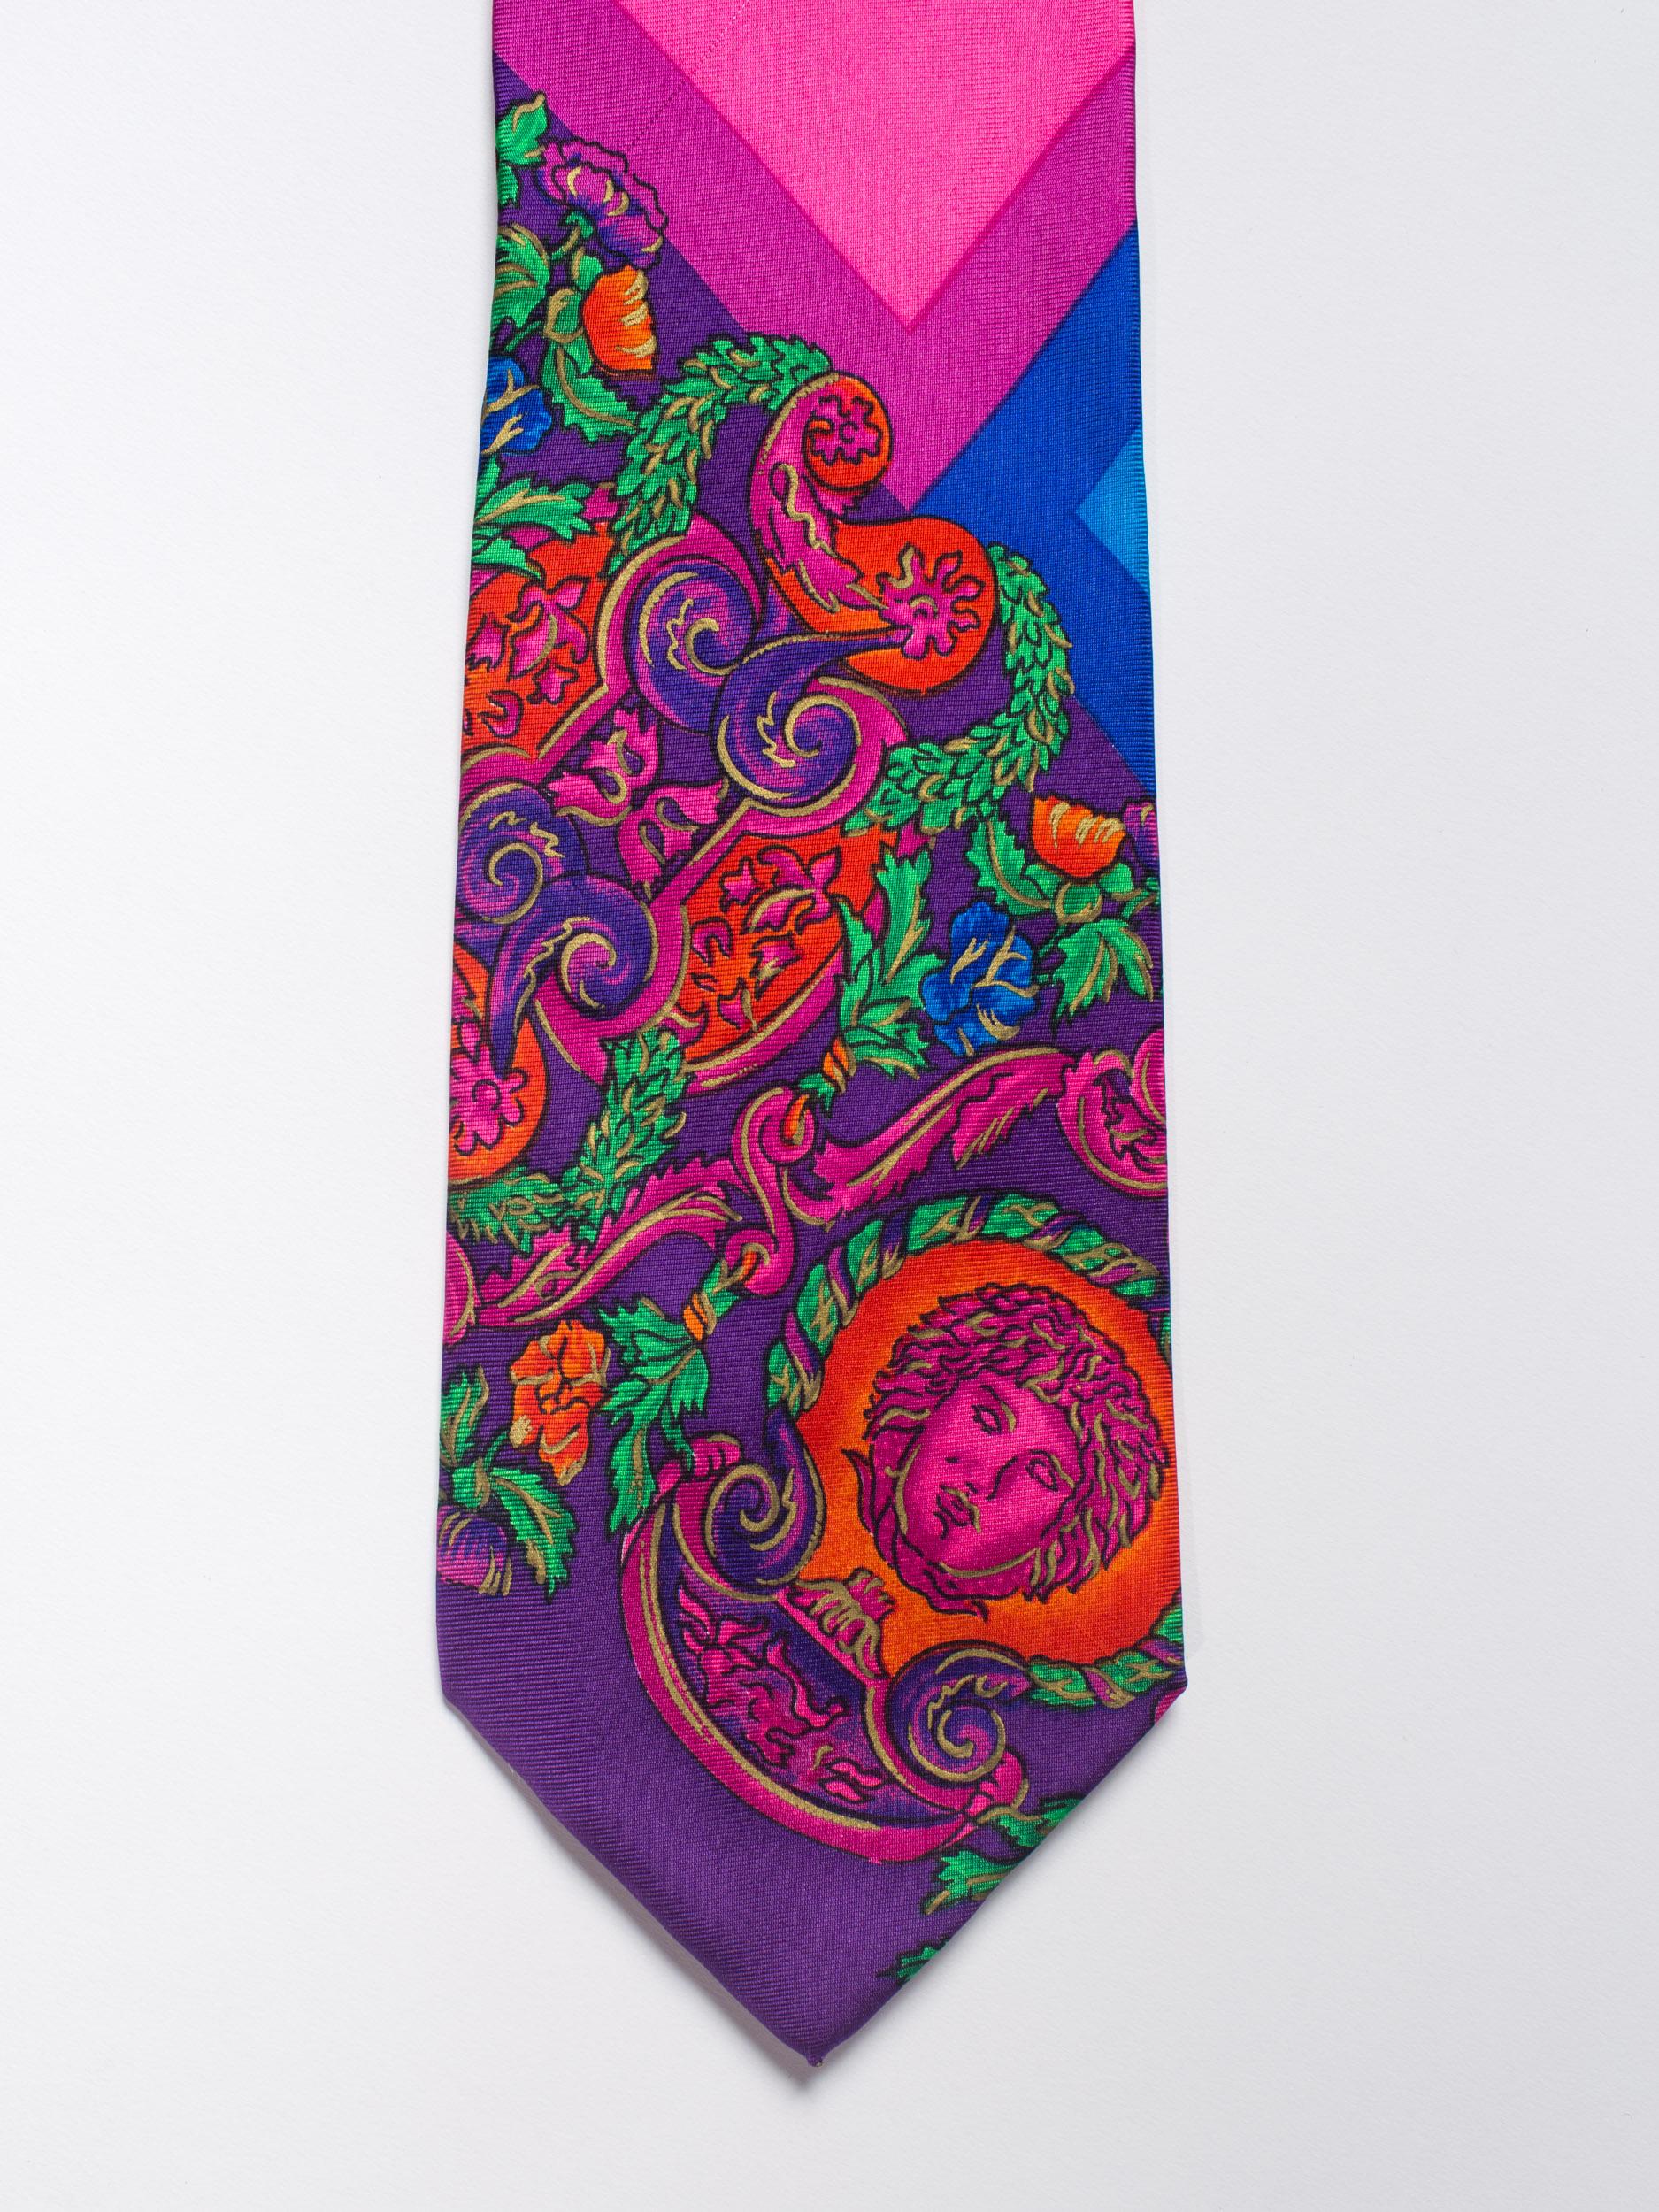 1990s Gianni Versace Hot Pink Medusa Silk Tie with Gold Metallic Accents 3